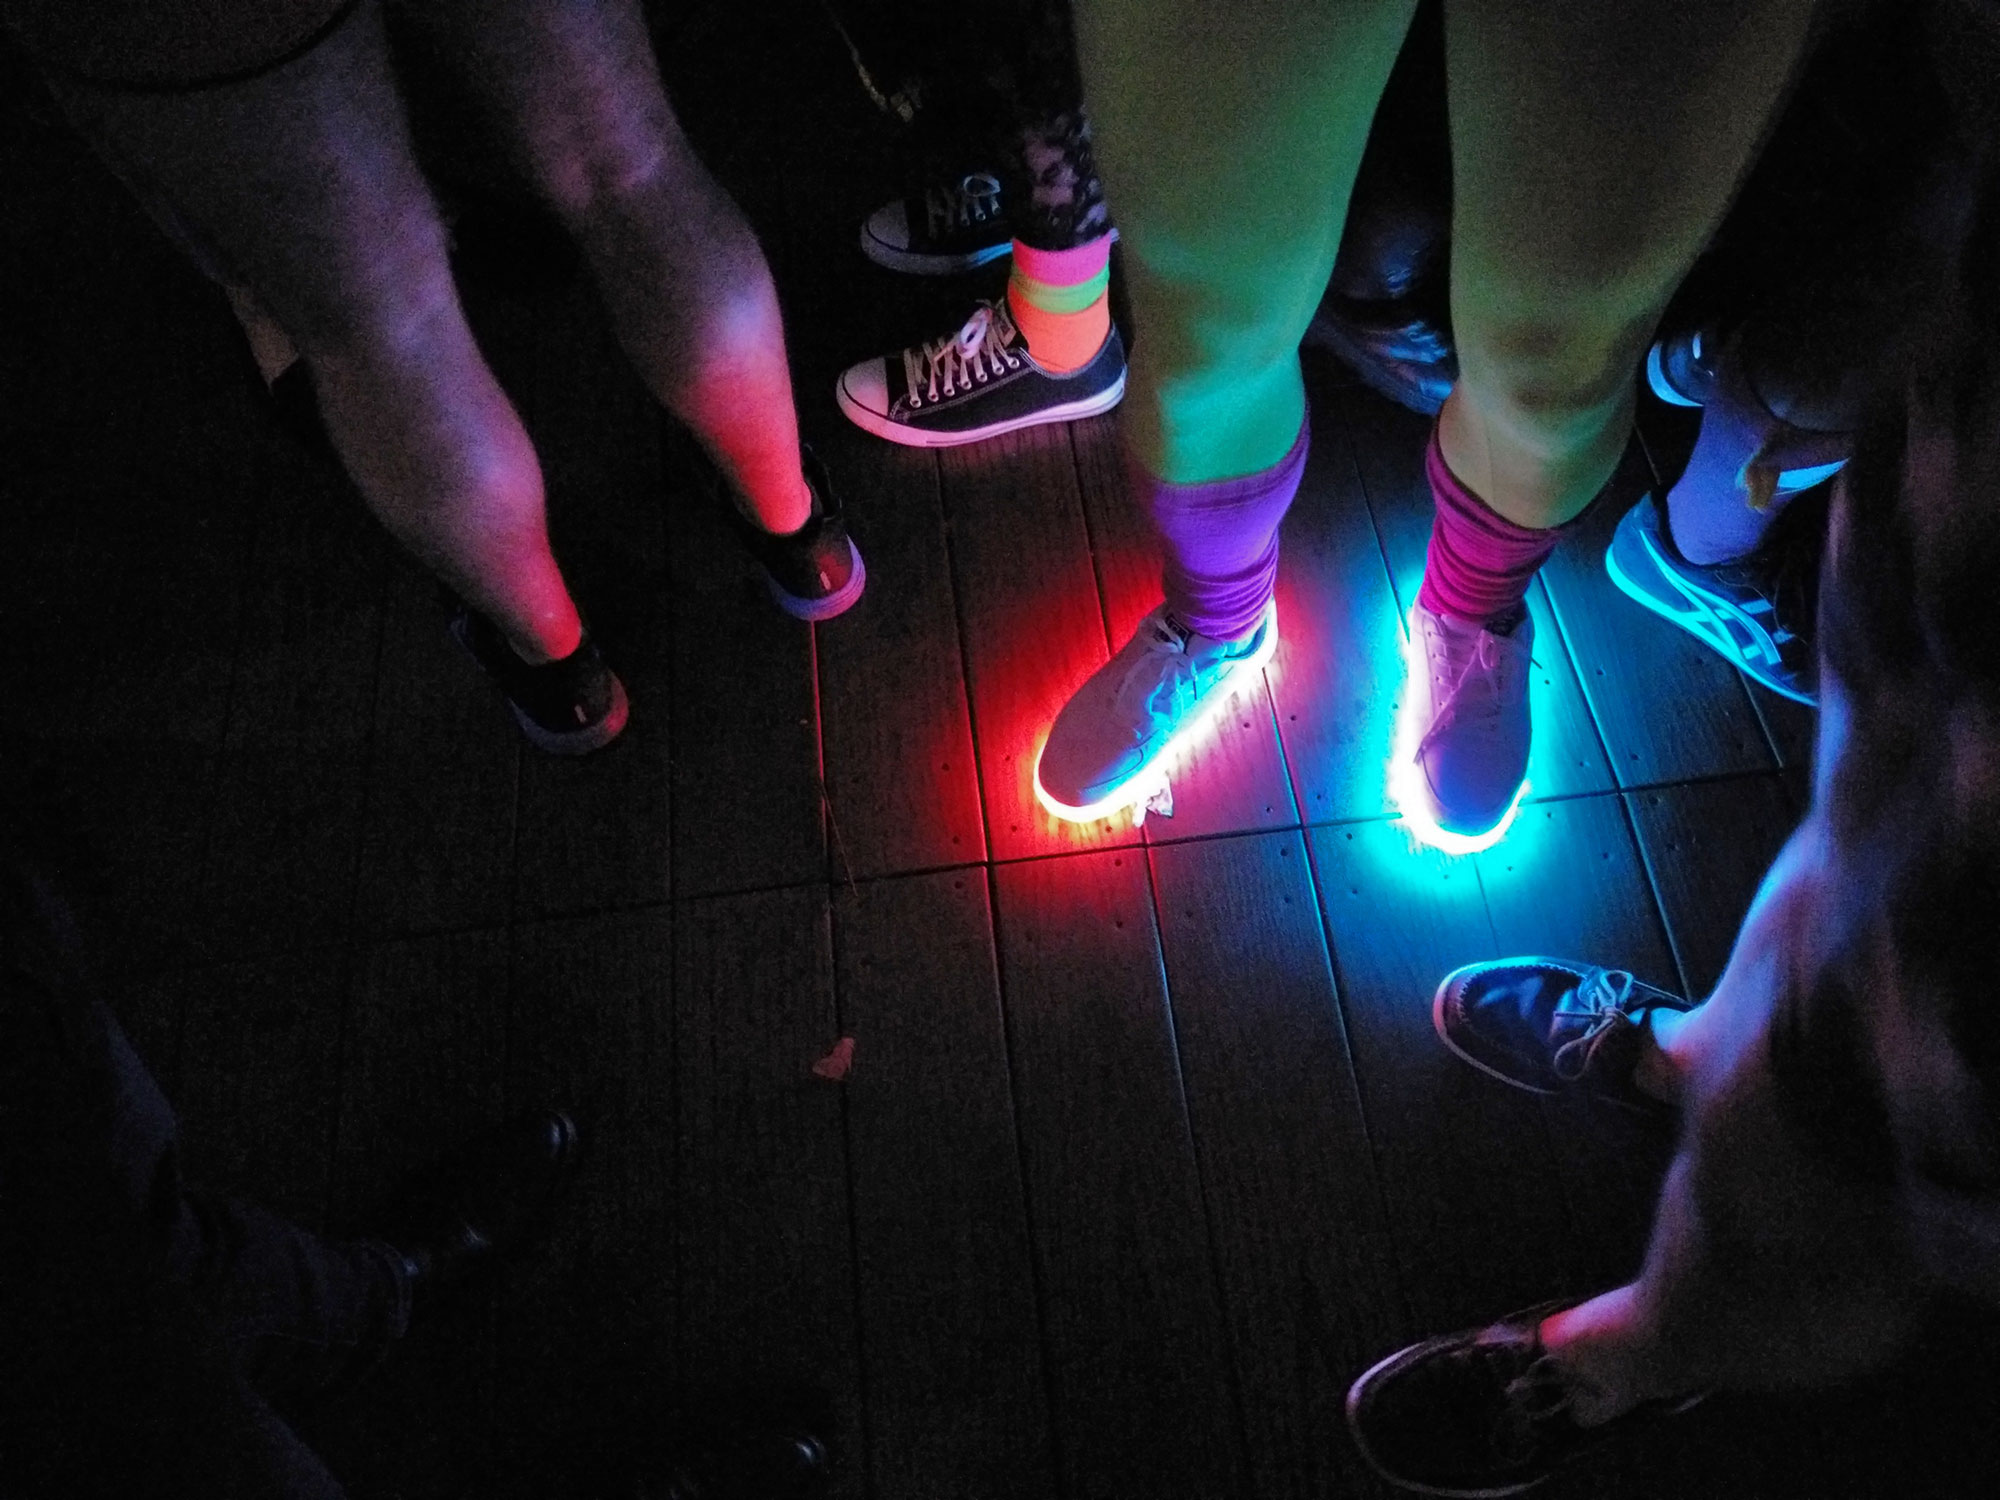 Light-up shoes at UPROAR Lounge in Washington D.C.